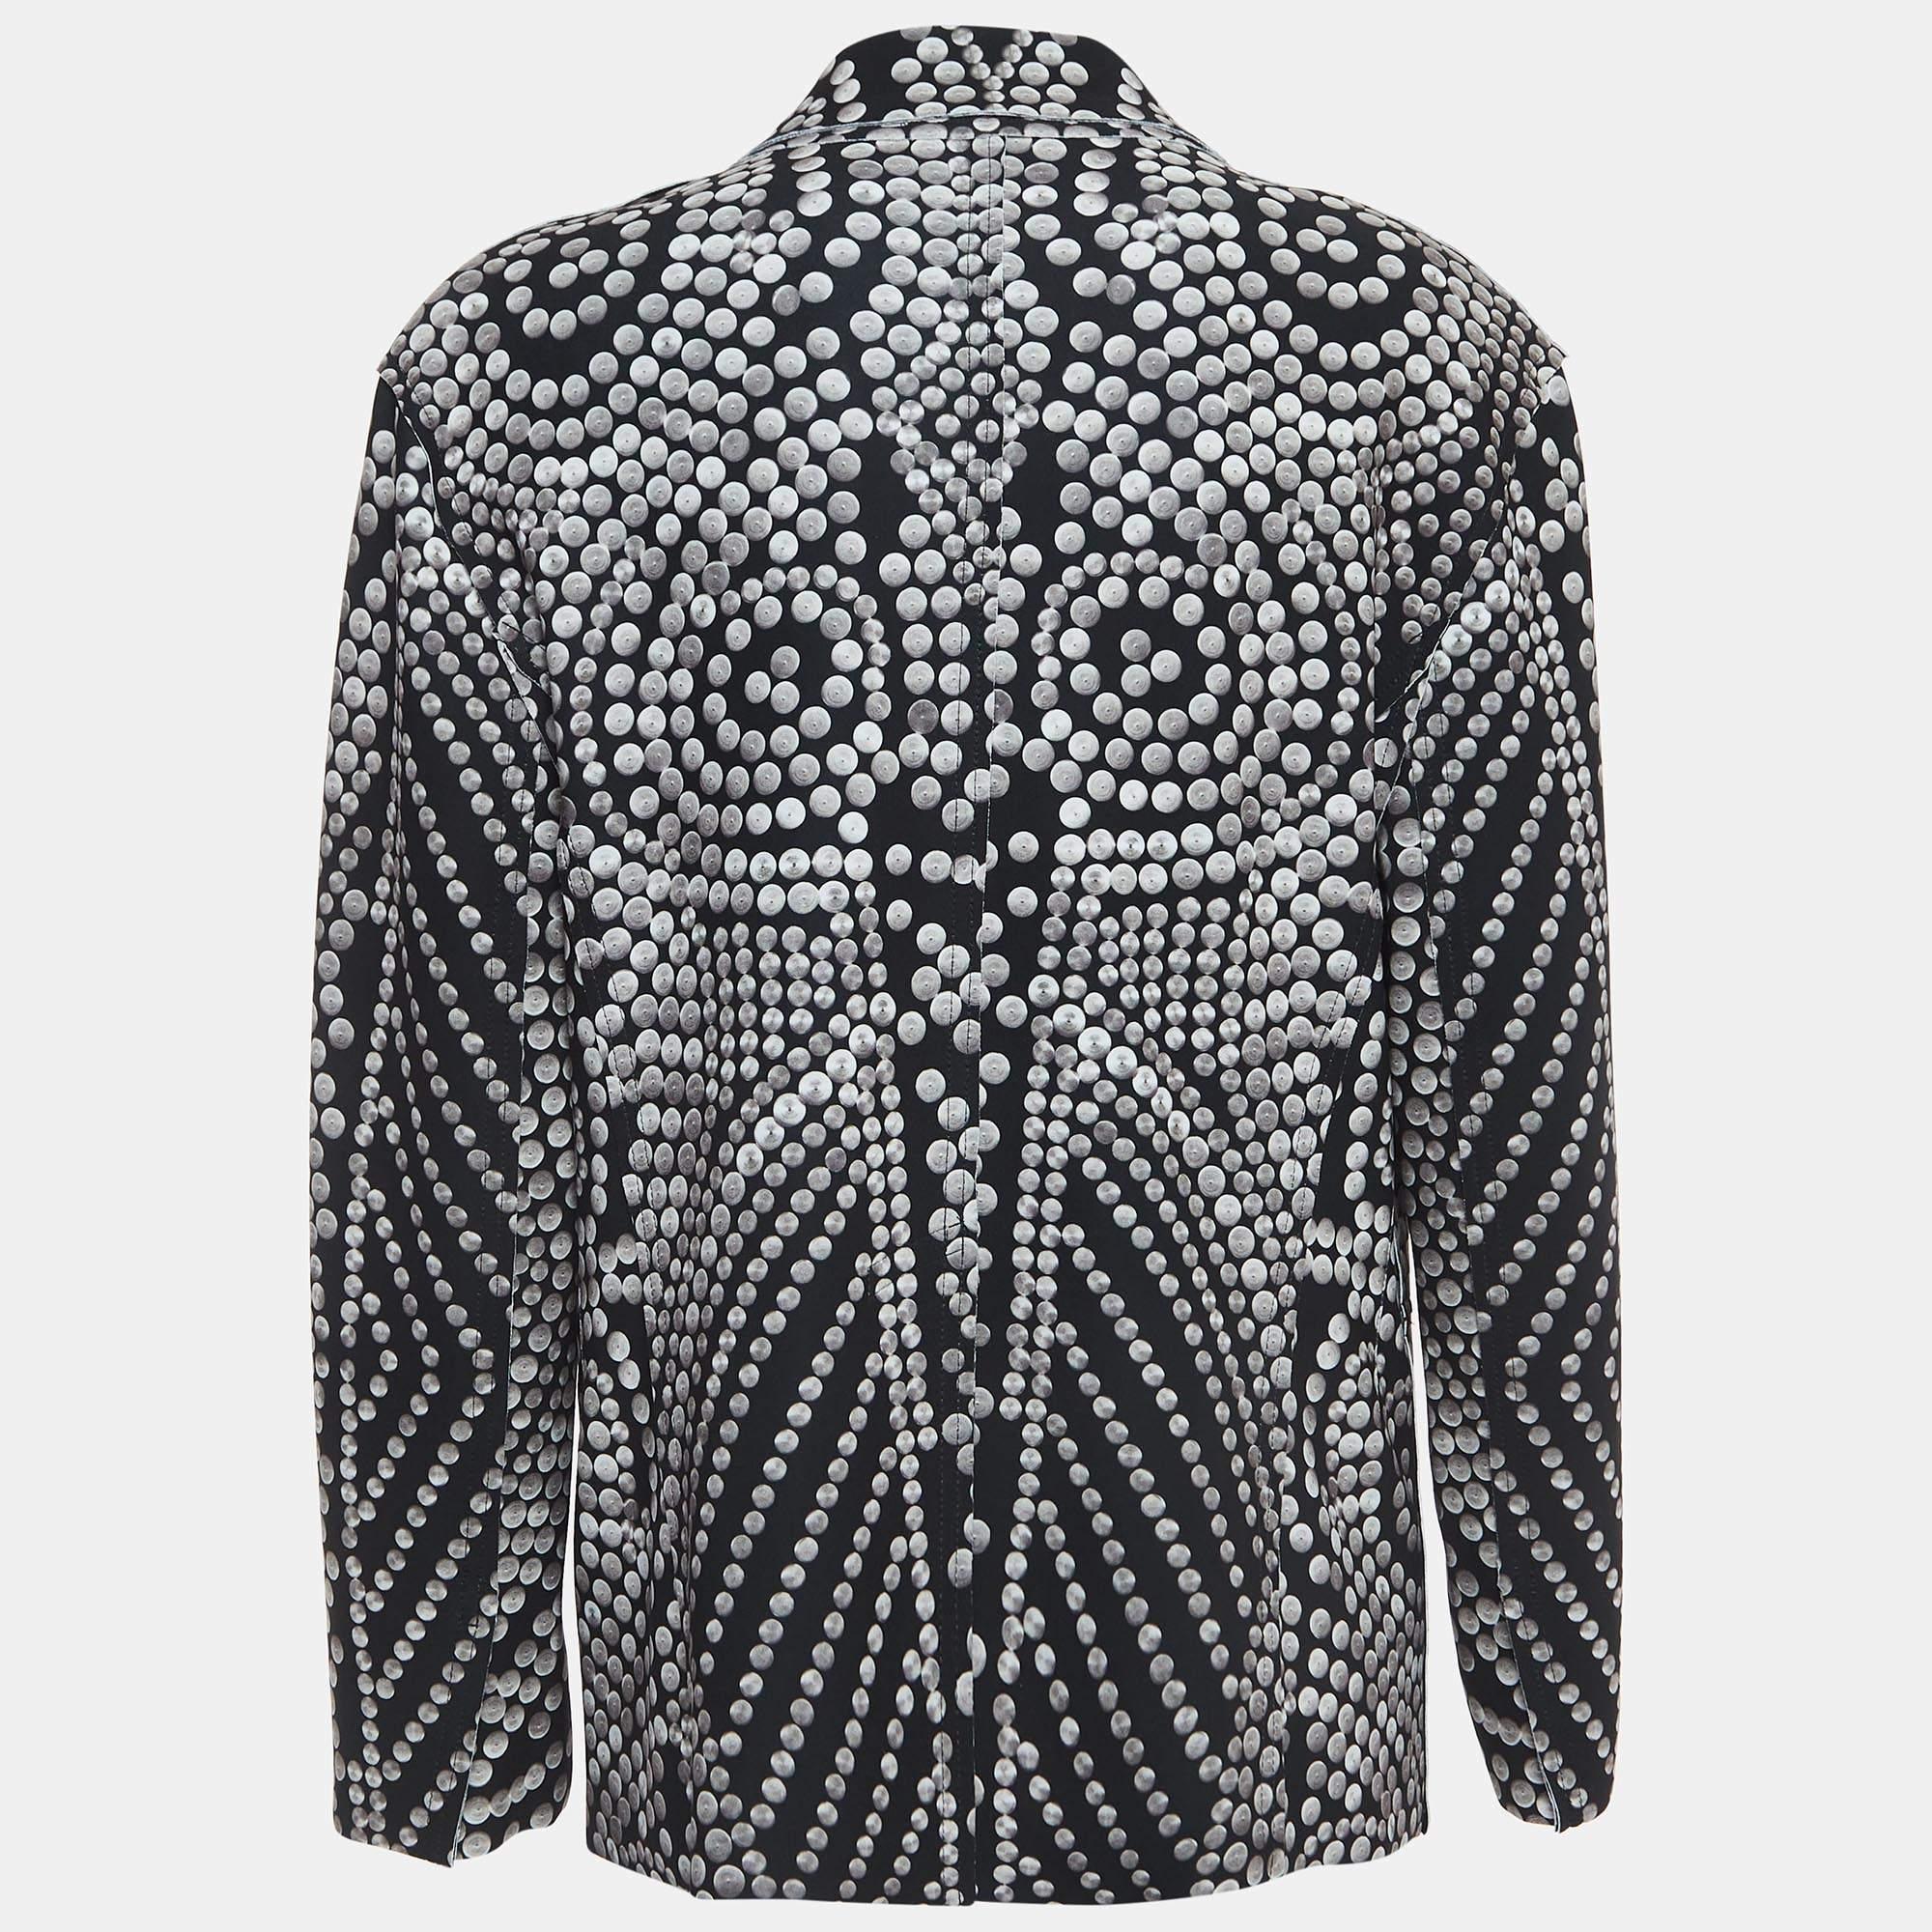 Infuse an extra dose of style into your outfit with this highly fashionable jacket. Tailored from quality materials, it embodies a contemporary vibe and is filled with functional characteristics. Black and grey digital print lycra single breasted